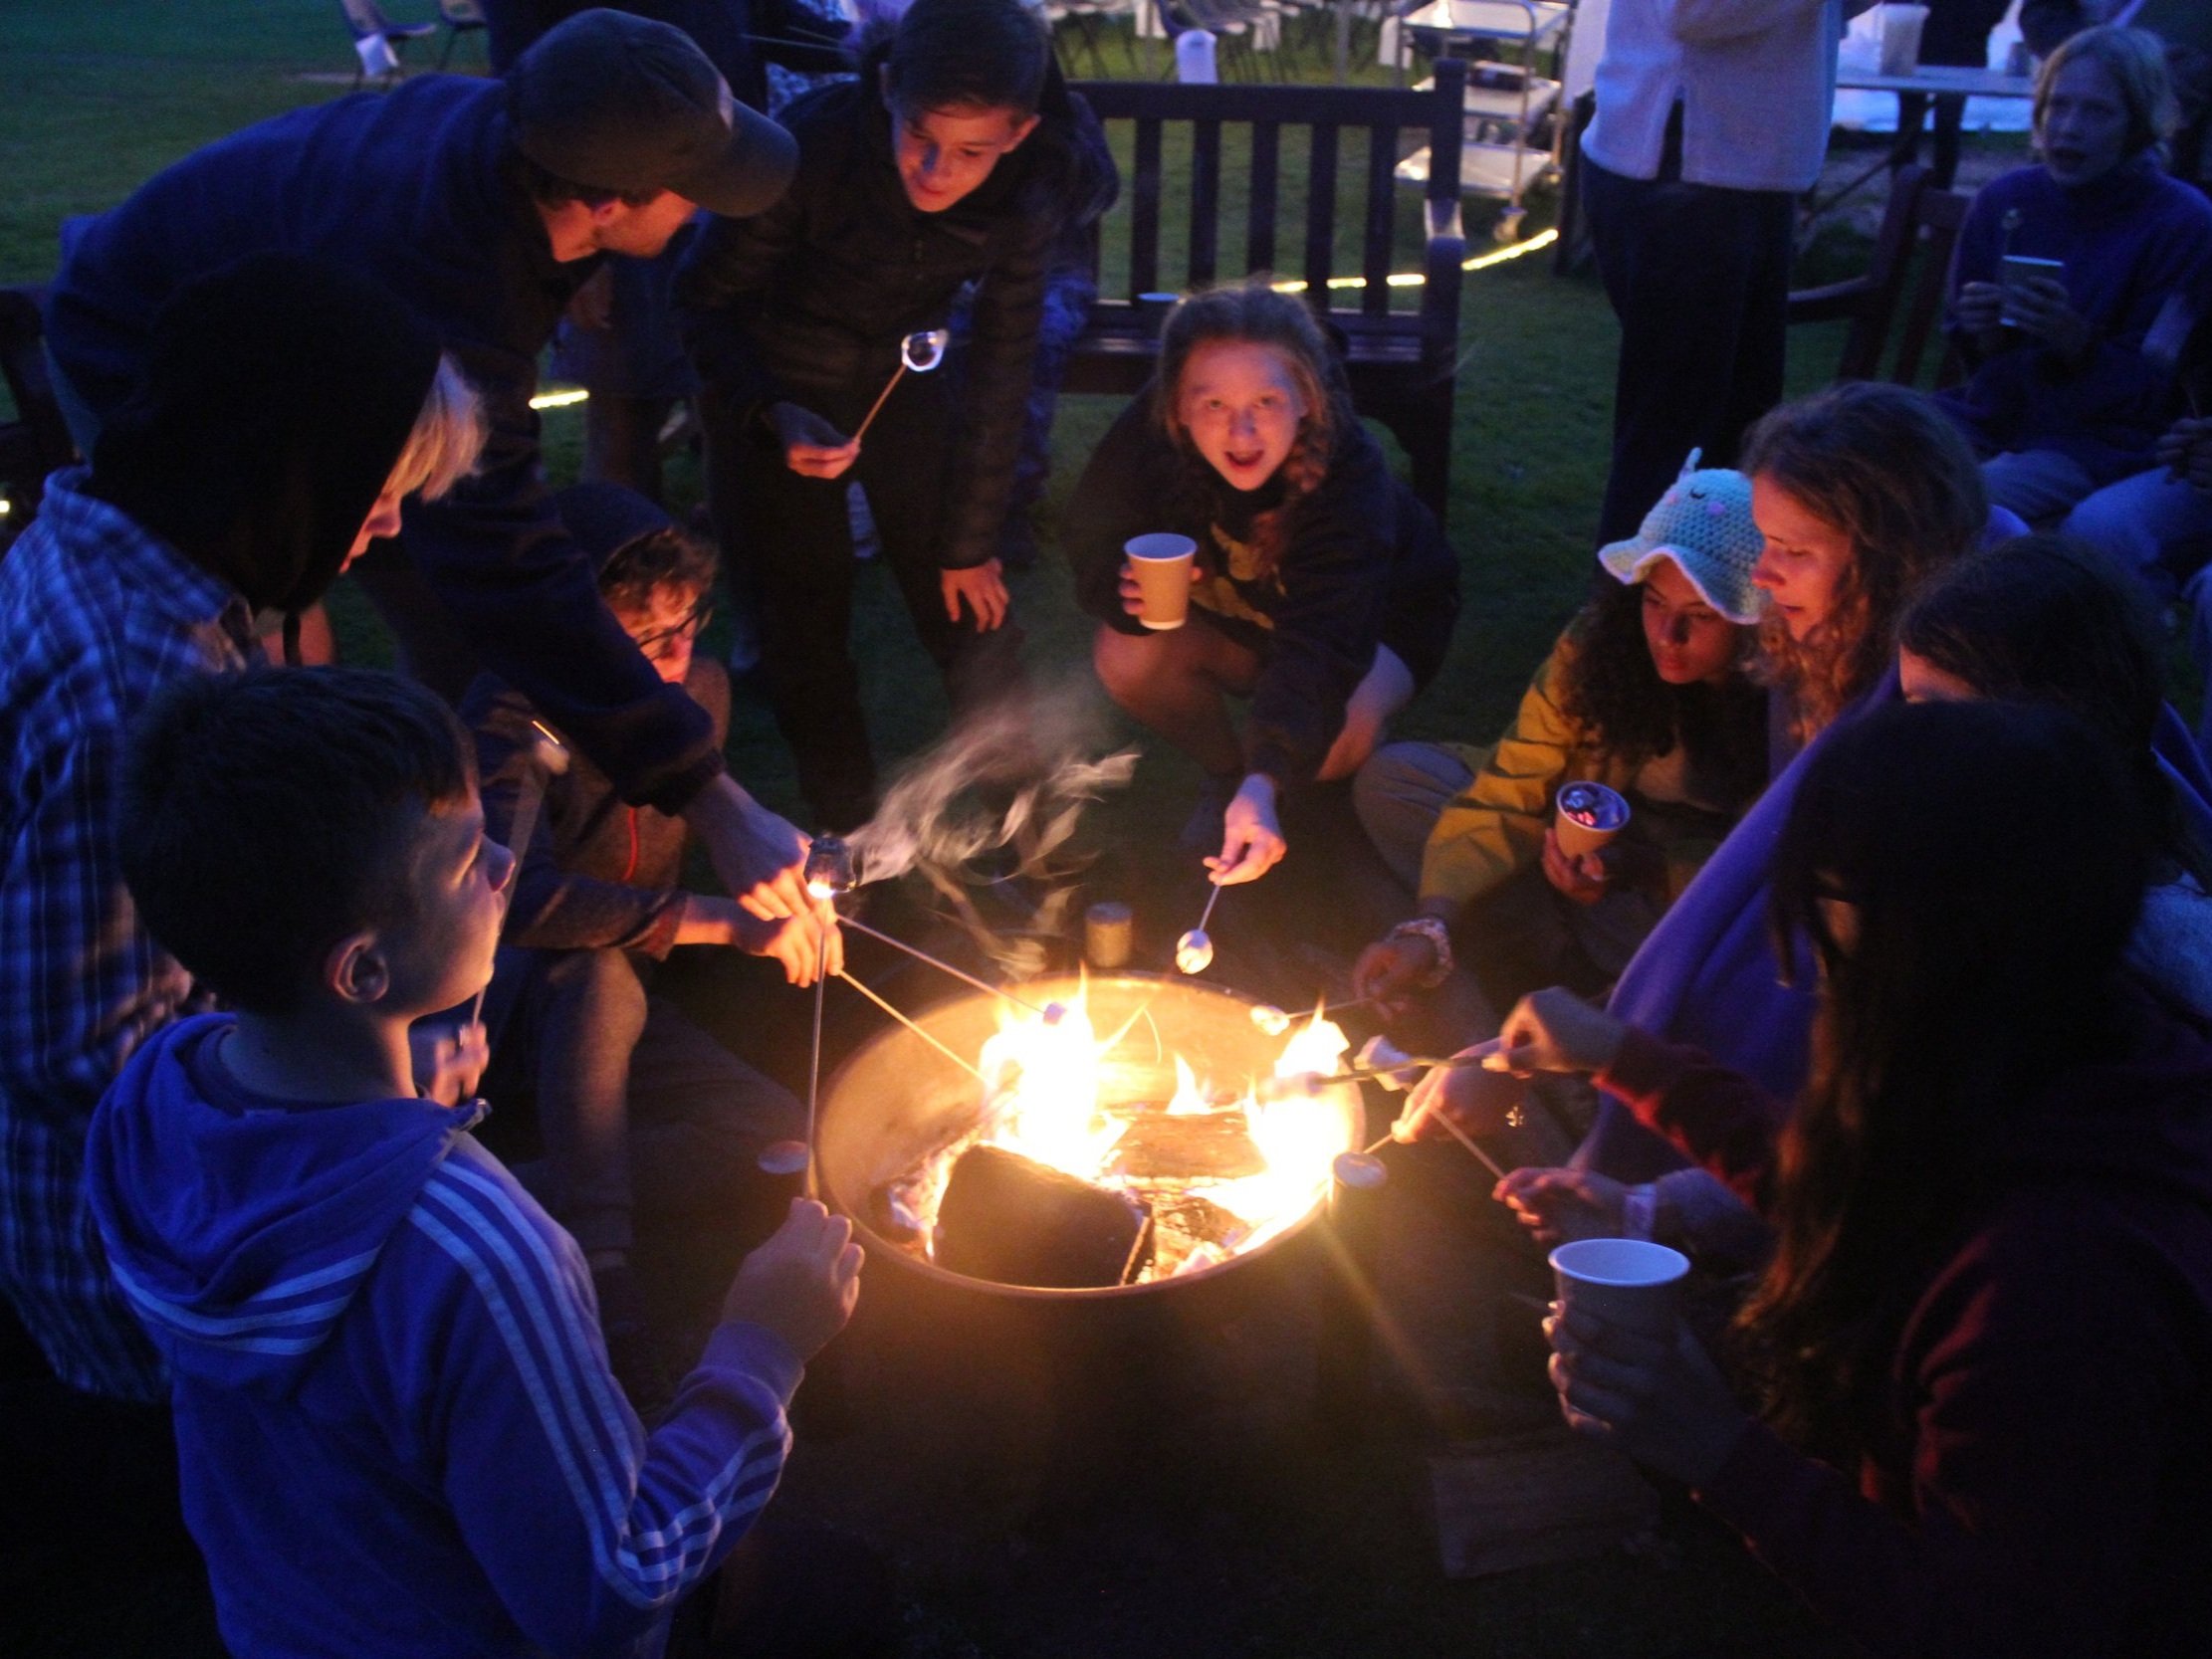 Toasting marshmallows around the campfire on summer camp